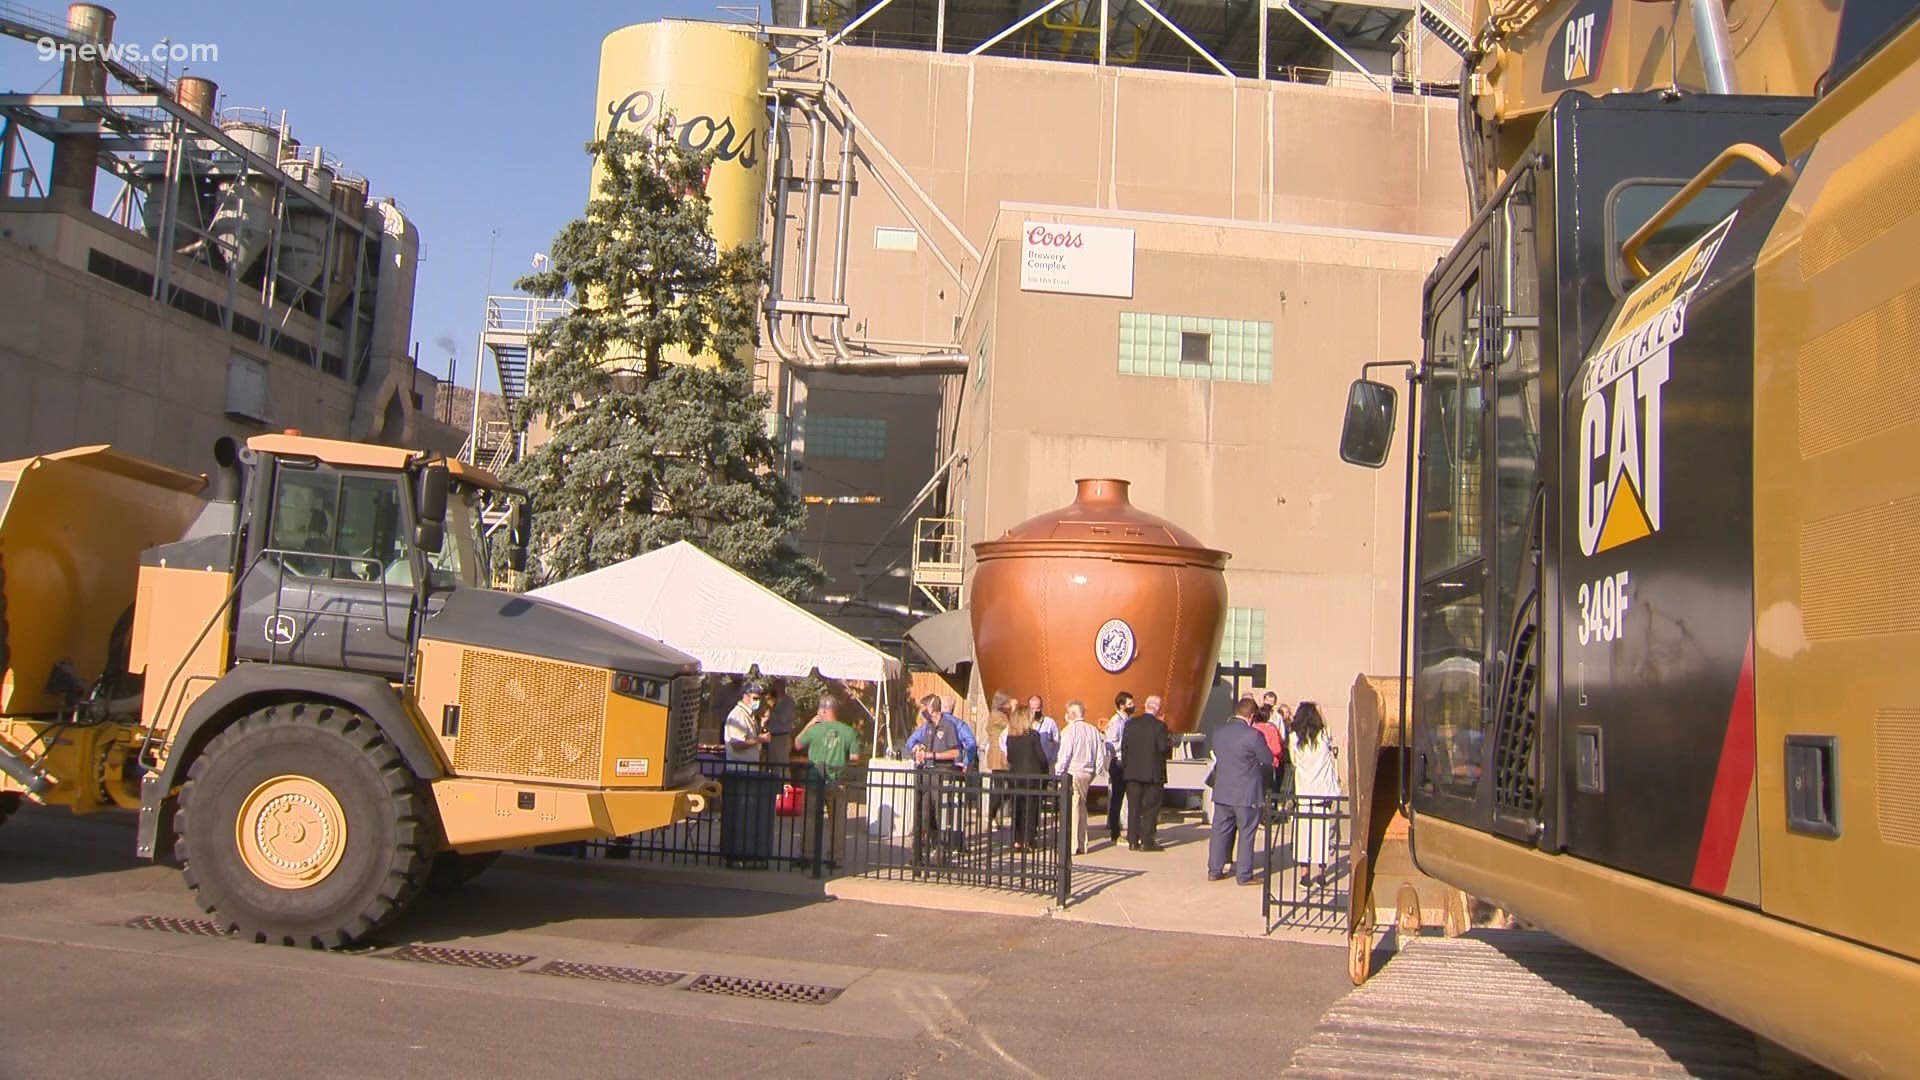 The company plans to upgrade some of its 50 to 70-year-old equipment at the Golden brewery.